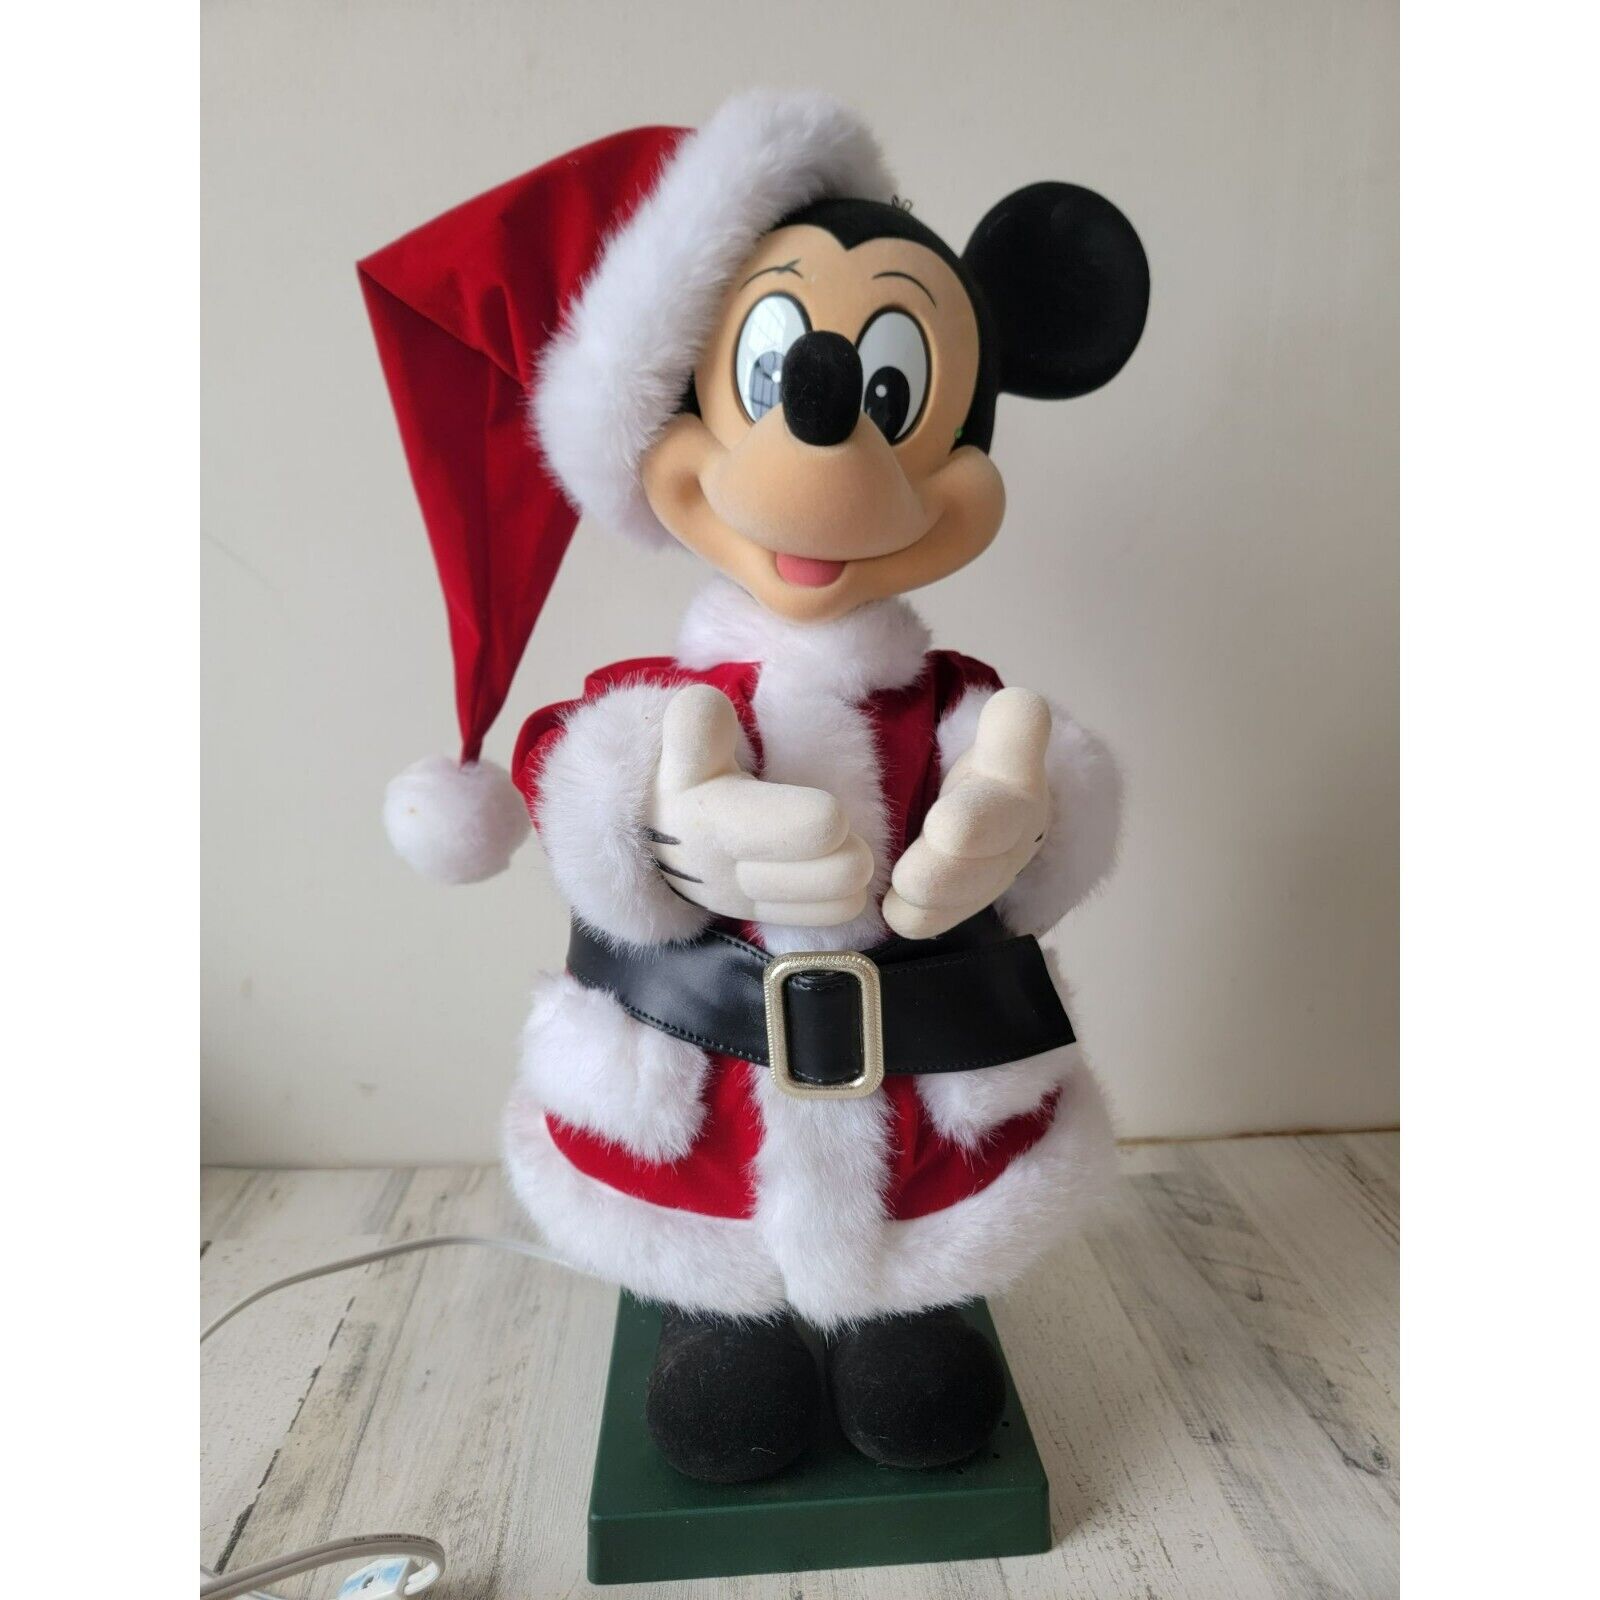 Telco Mickey Mouse Animated Music motionette Santa Claus Xmas decor